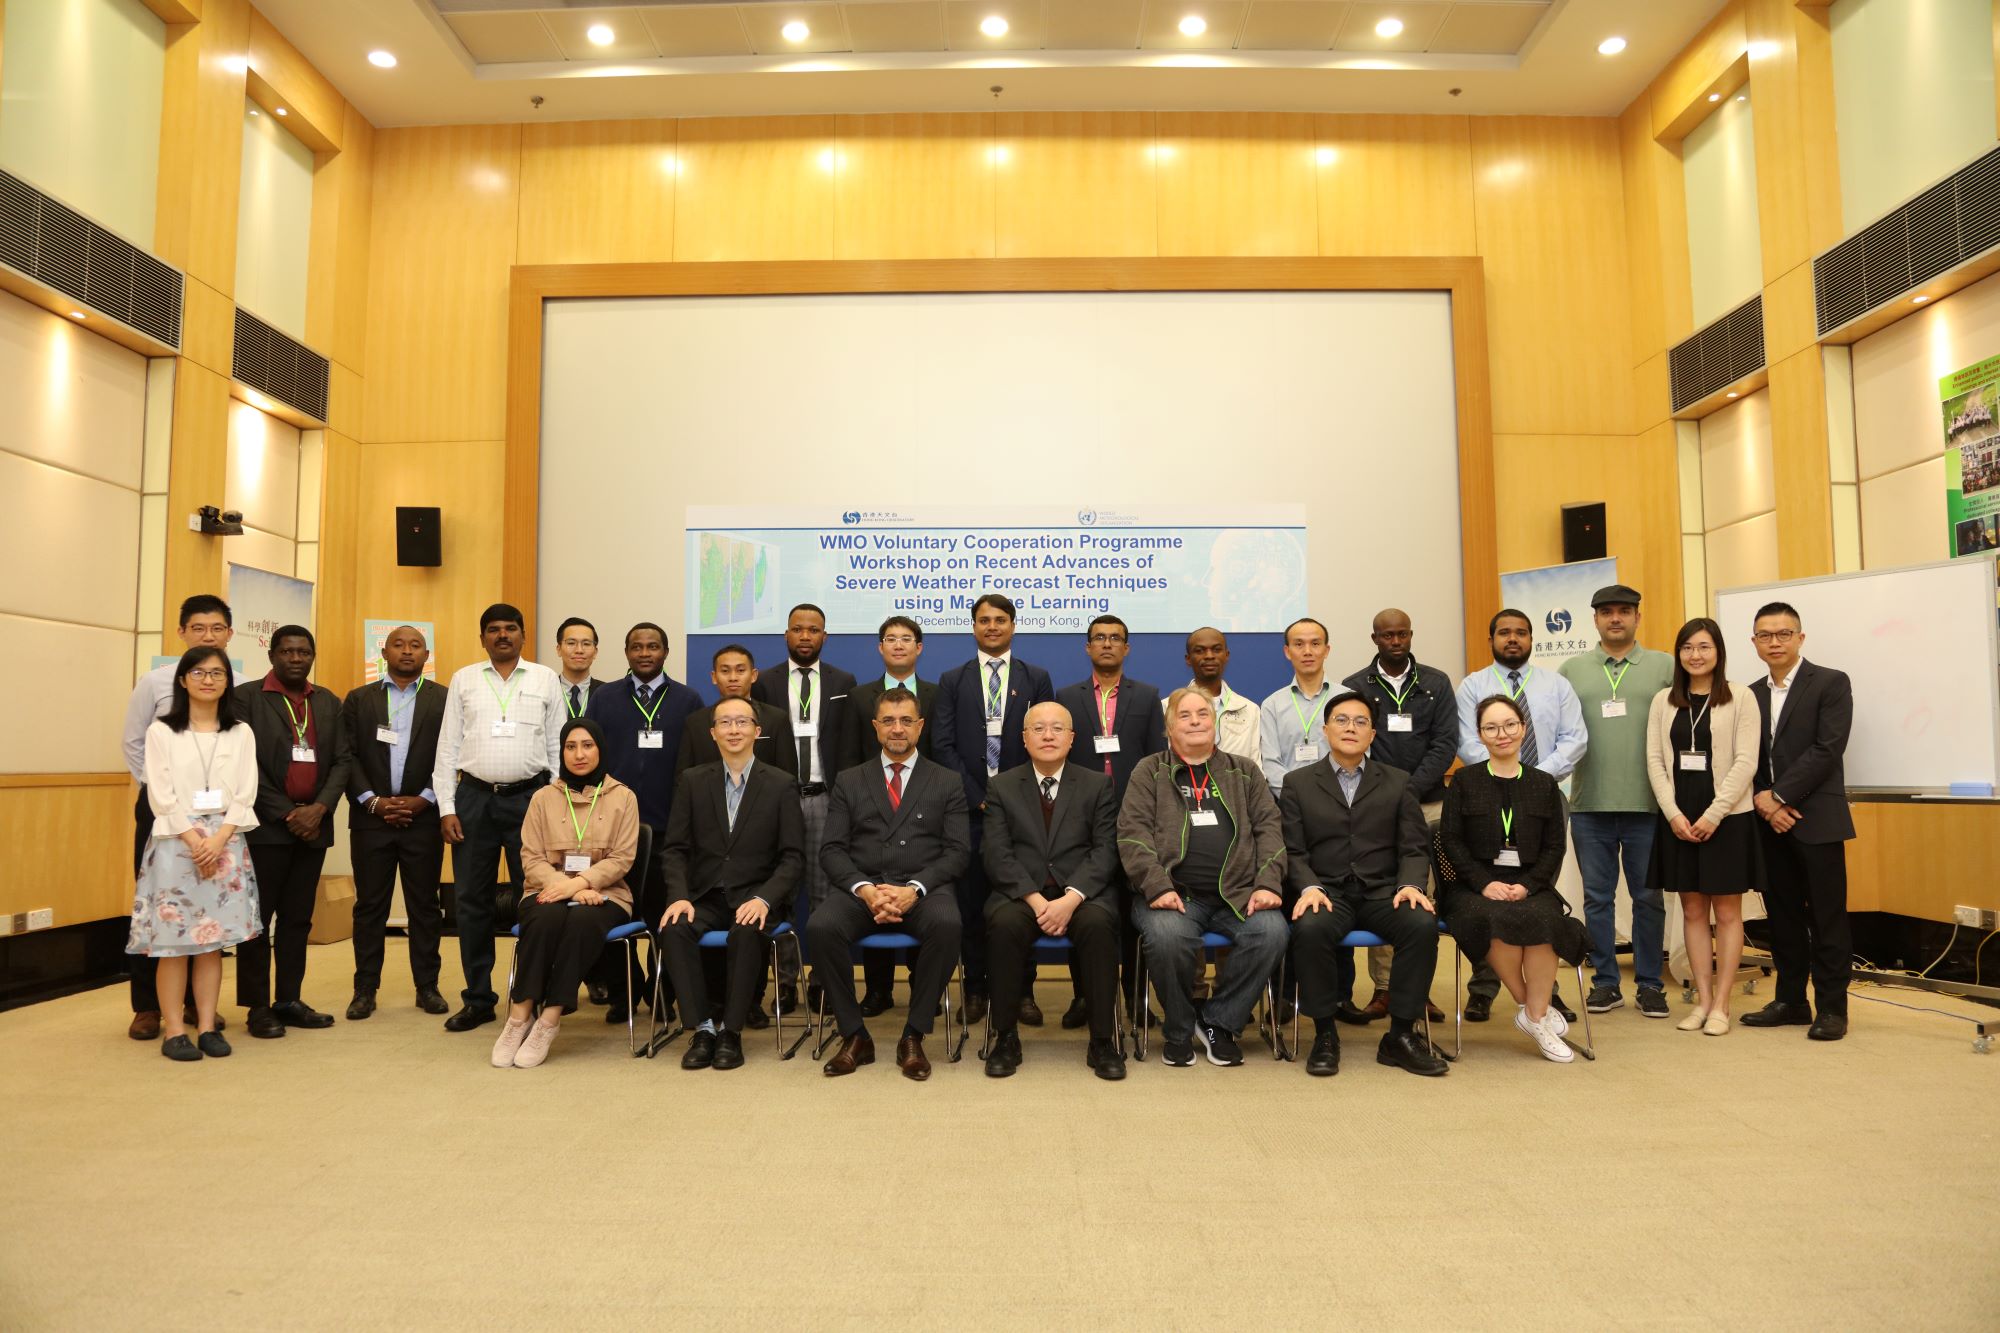 Dr Chan Pak-wai, Director of the Observatory (front row, middle), Mr Jeffrey Adie of NVIDIA (front row, third from the right), and Mr Mustafa Adiguzel of WMO (front row, third from the left) with workshop participants